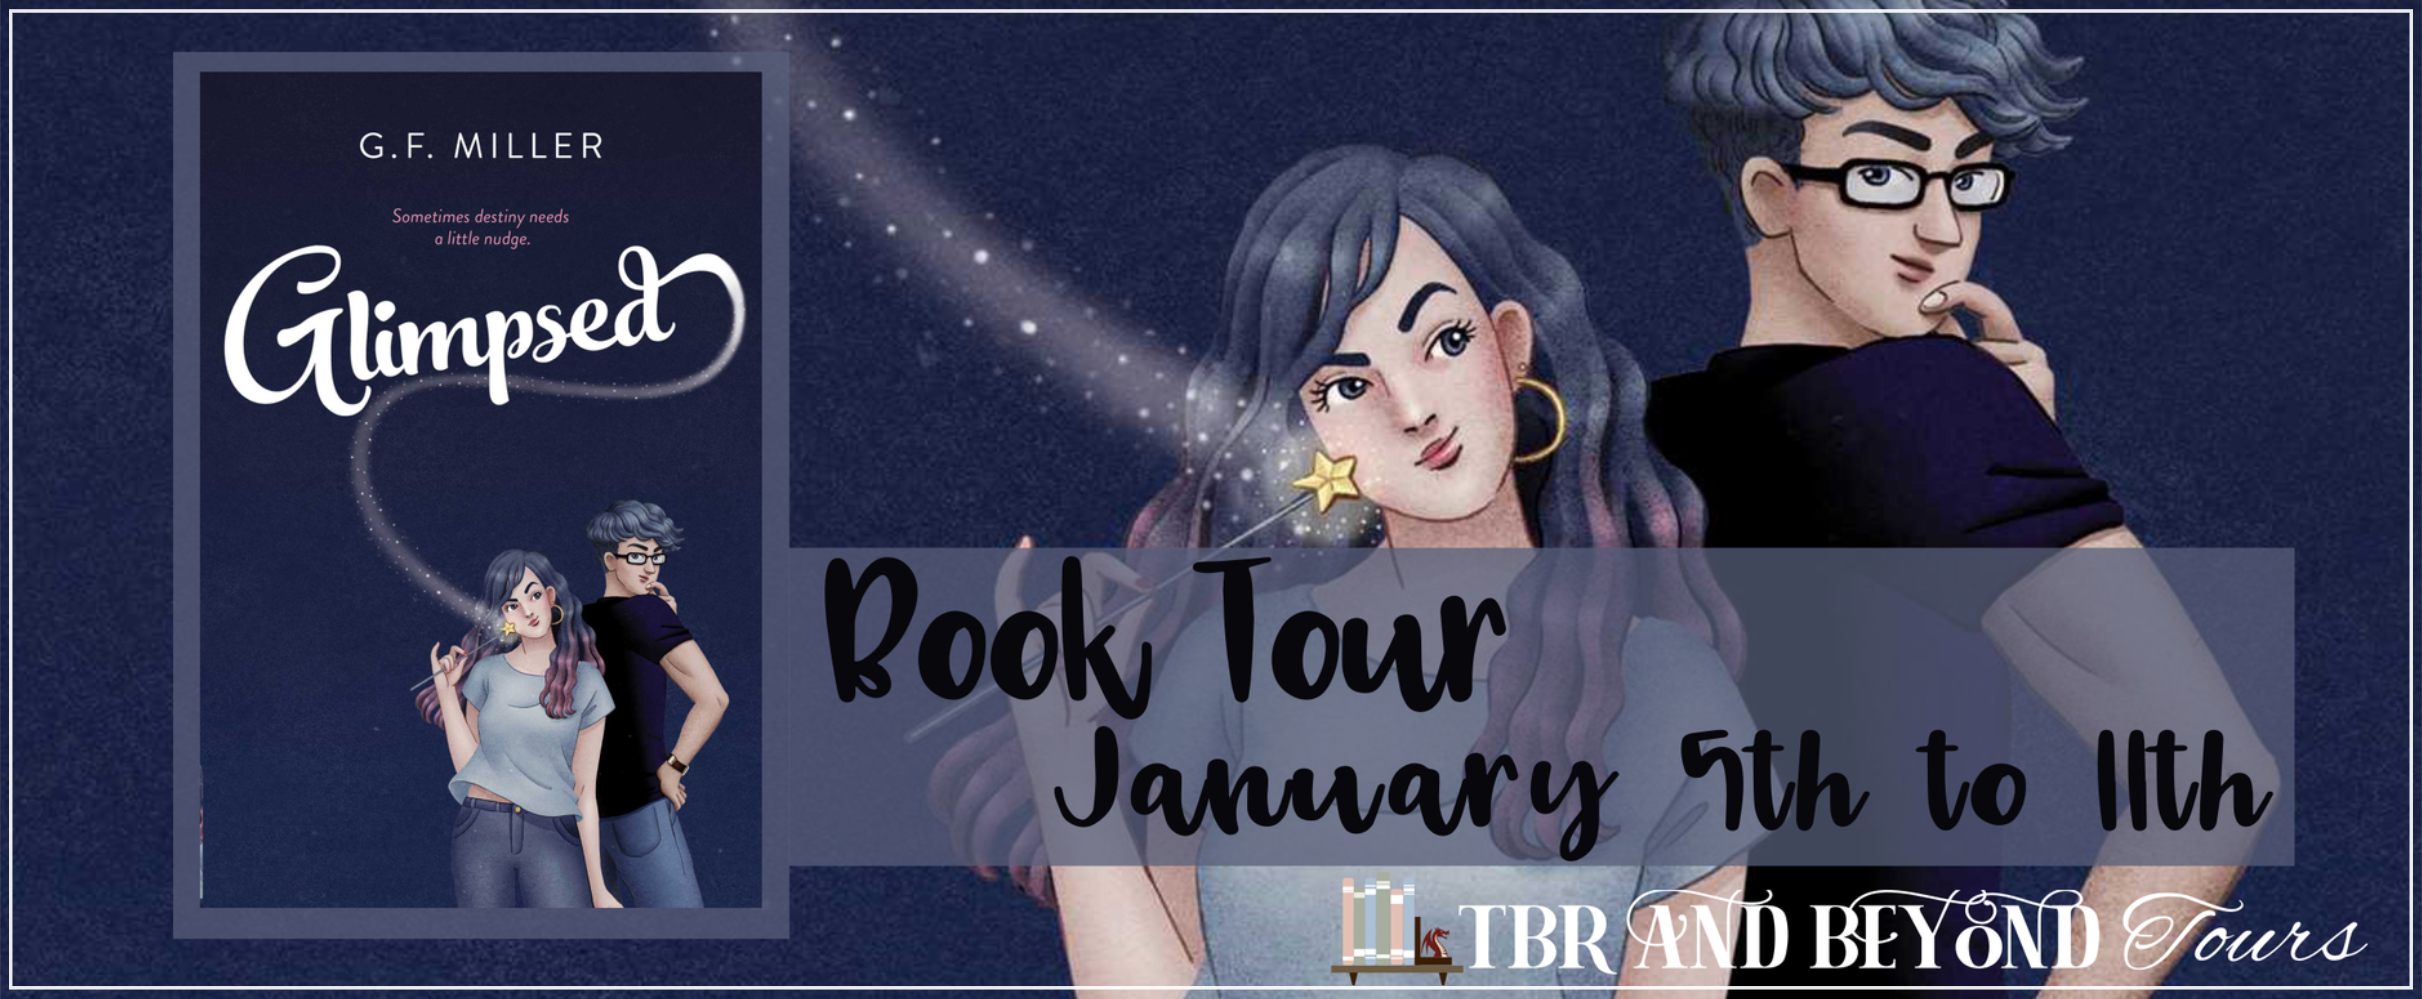 Blog Tour: Glimpsed by G.F. Miller! (Interview + Bookstagram + Giveaway!)